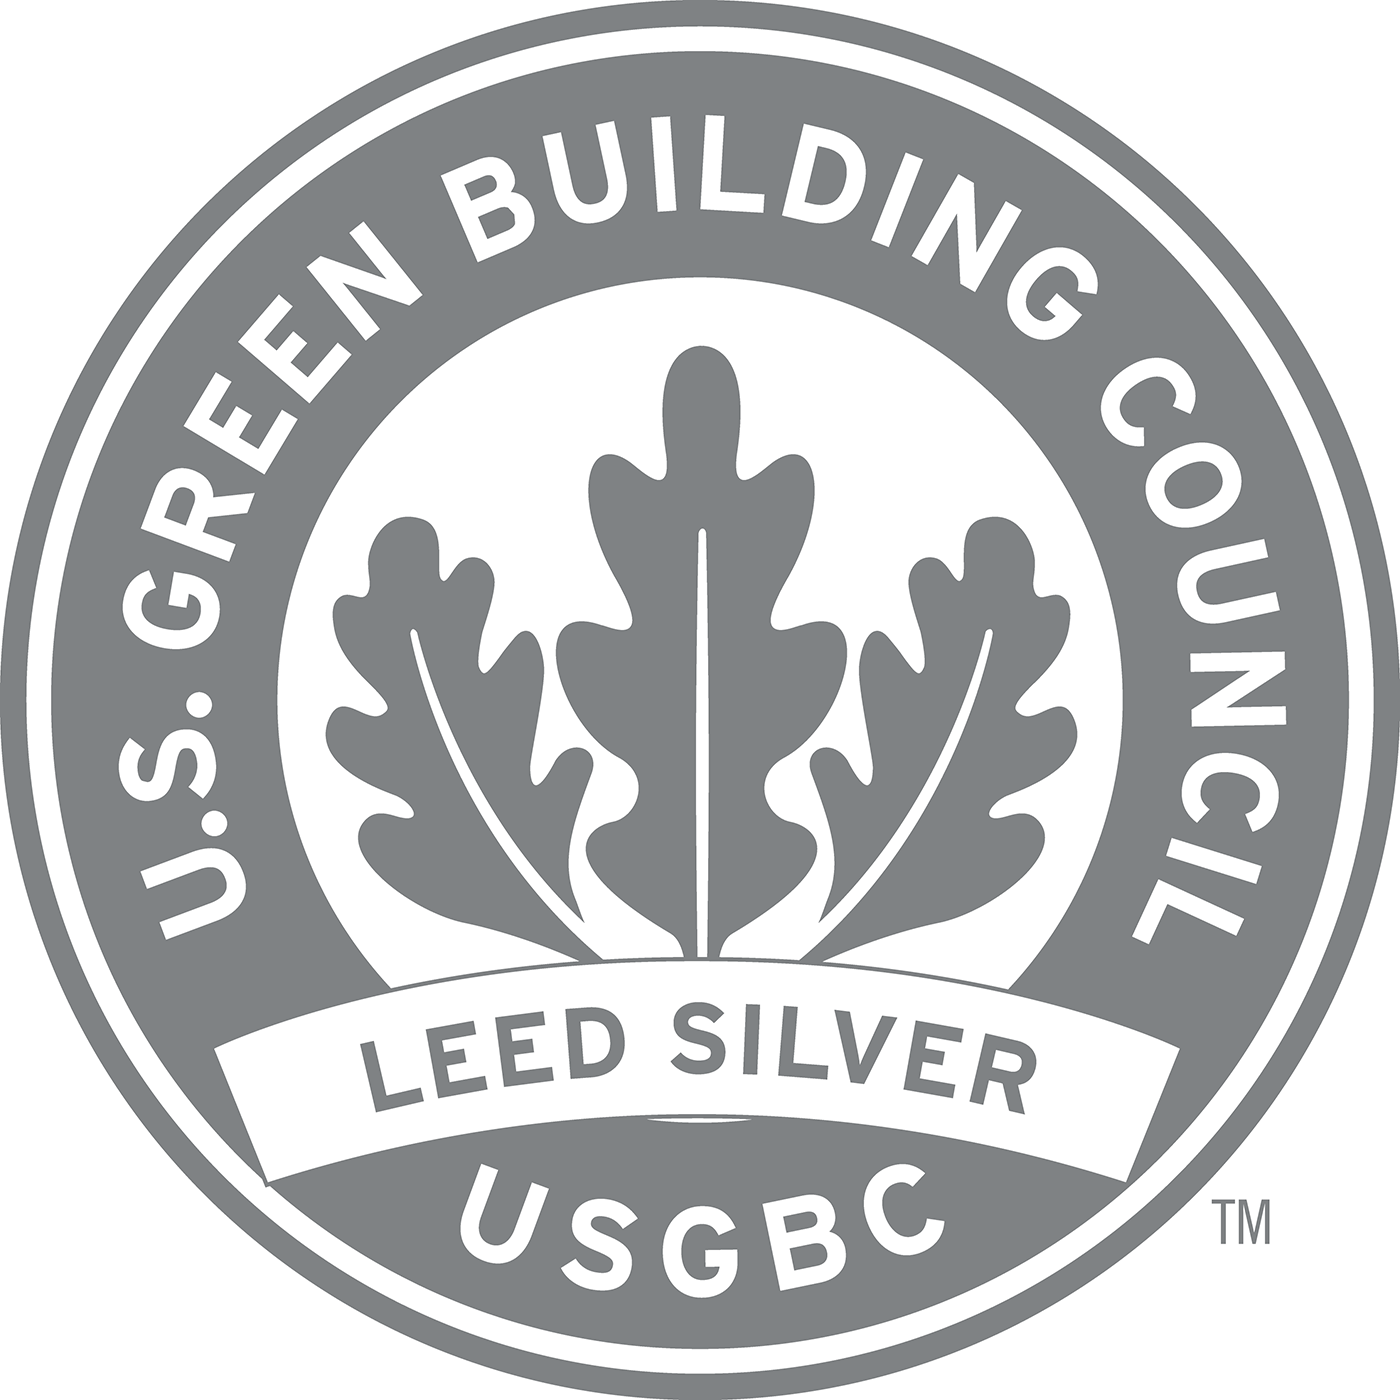 LEED Silver Certified logo: LEED (Leadership in Energy and Environmental Design) is a certification process that spreads environmental awareness to architects and contractors when constructing buildings. The design incorporates energy-efficient, water-conserving buildings with sustainable materials.  There are four levels in which projects can be rated:  Platinum (80+ points earned) Gold (60-79 points earned) Silver (50-59 points earned) Certified (40-49 points earned)